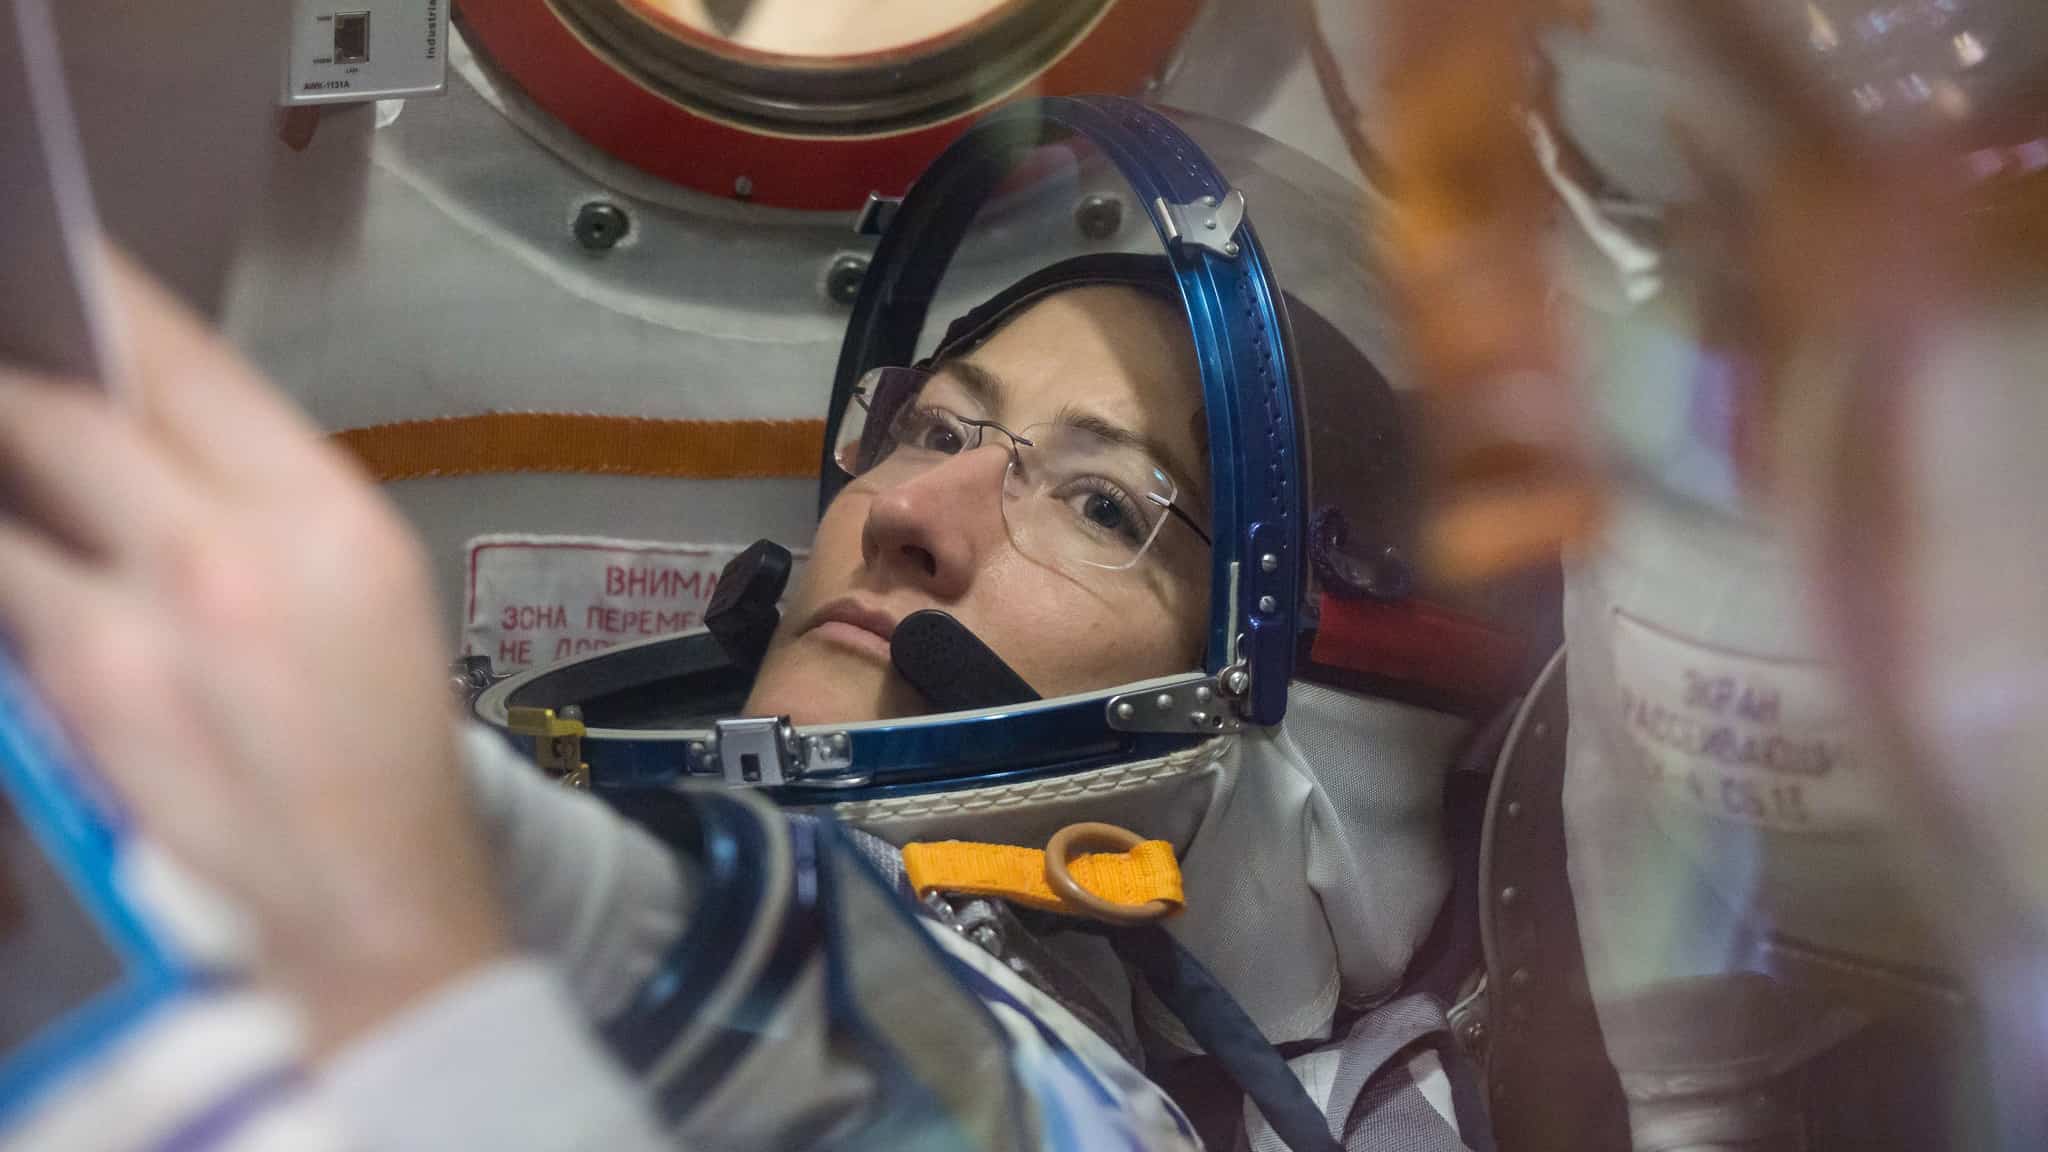 Christina Koch in astronaut gear during training for her space launch